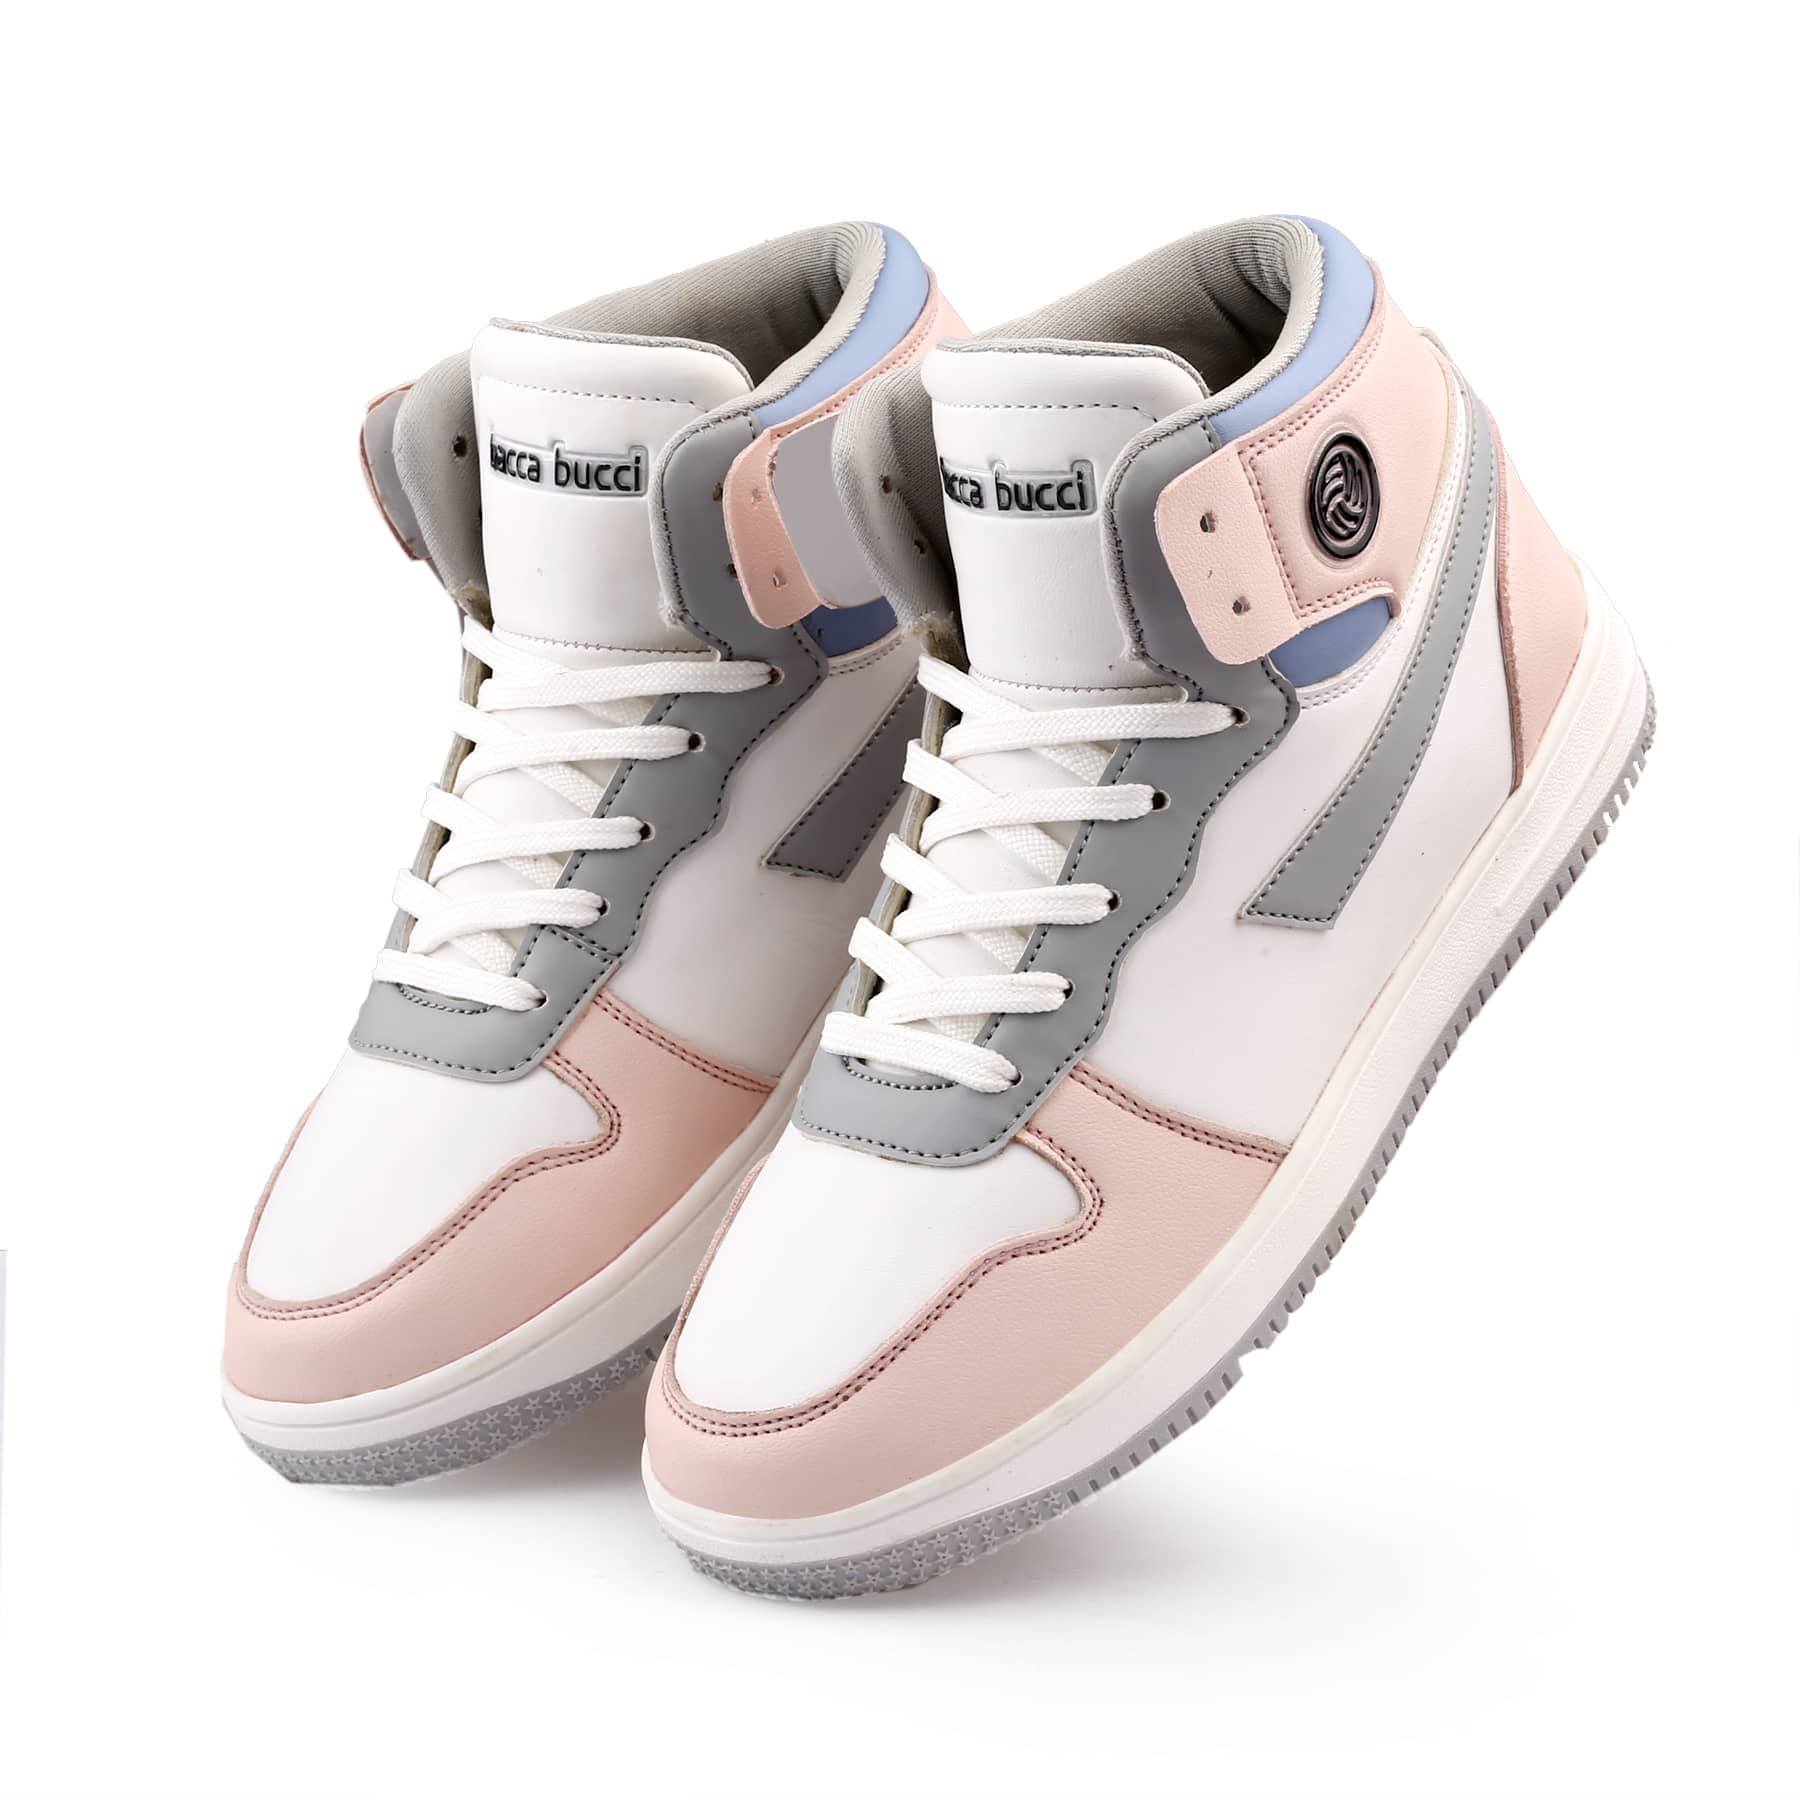 Bacca Bucci Femme High-Top Harmony Sneakers—Elegant Pastel Blue and Pink Women's Lace-Ups